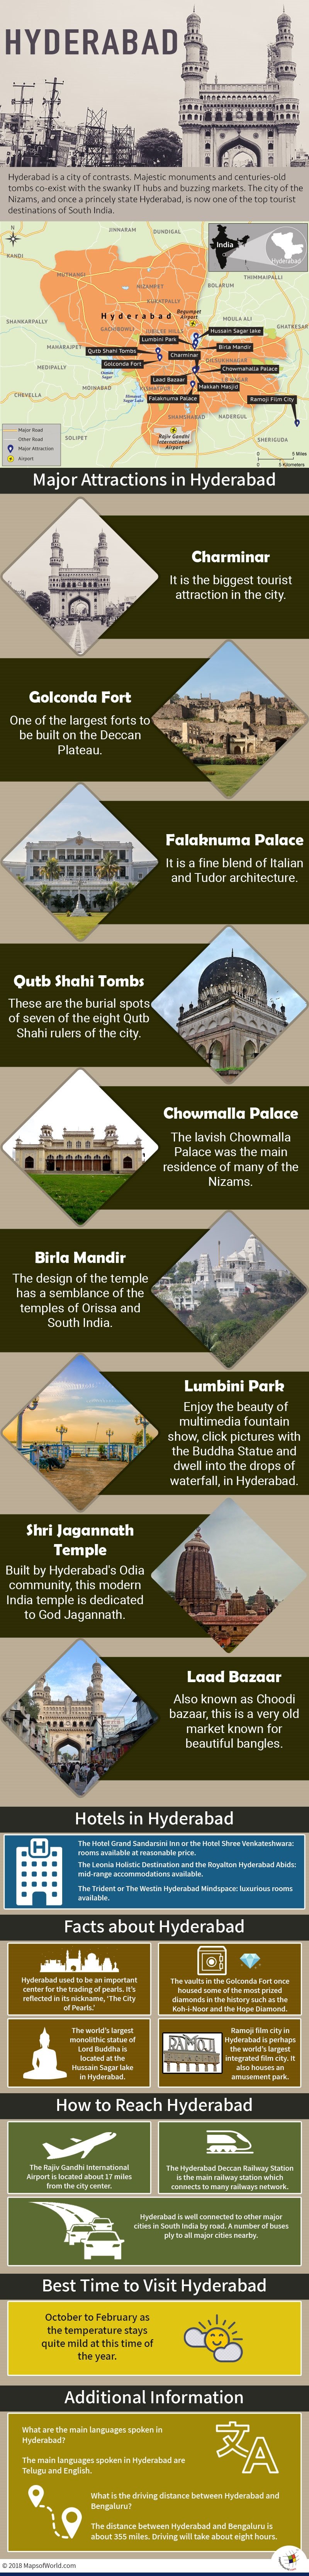 Infographic Depicting Hyderabad Tourist Attractions